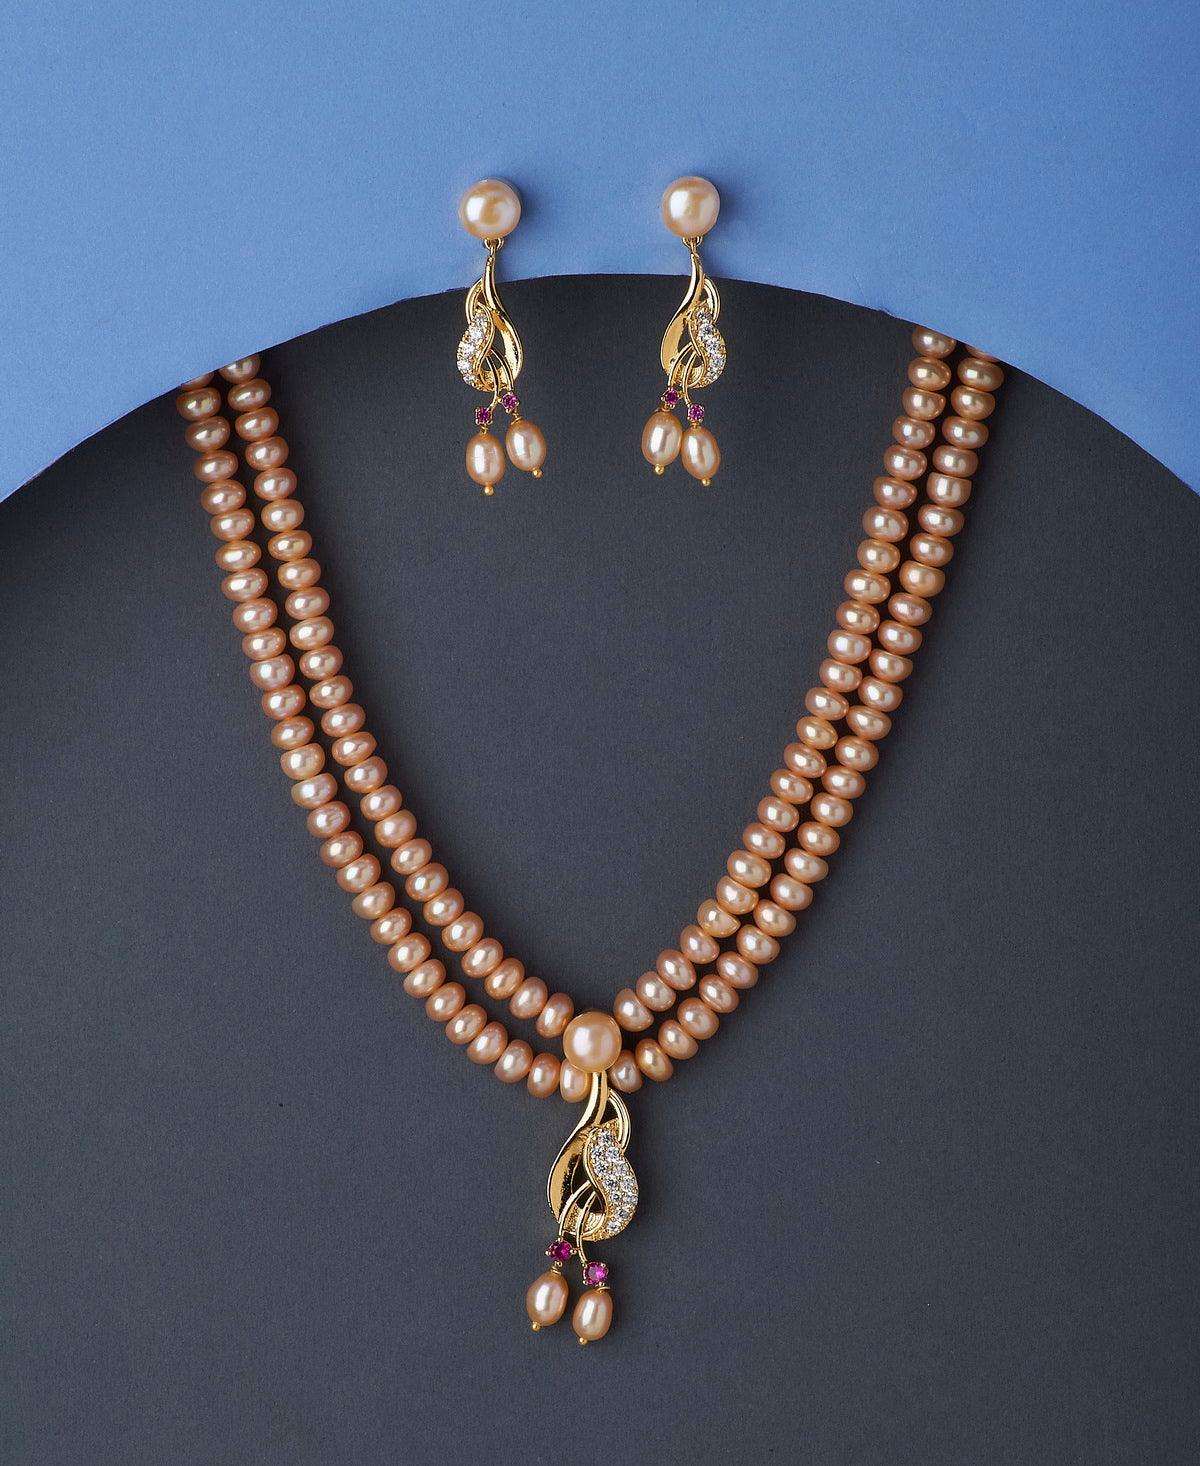 Trendy Stone Studded Pink Pearl Necklace Set - Chandrani Pearls